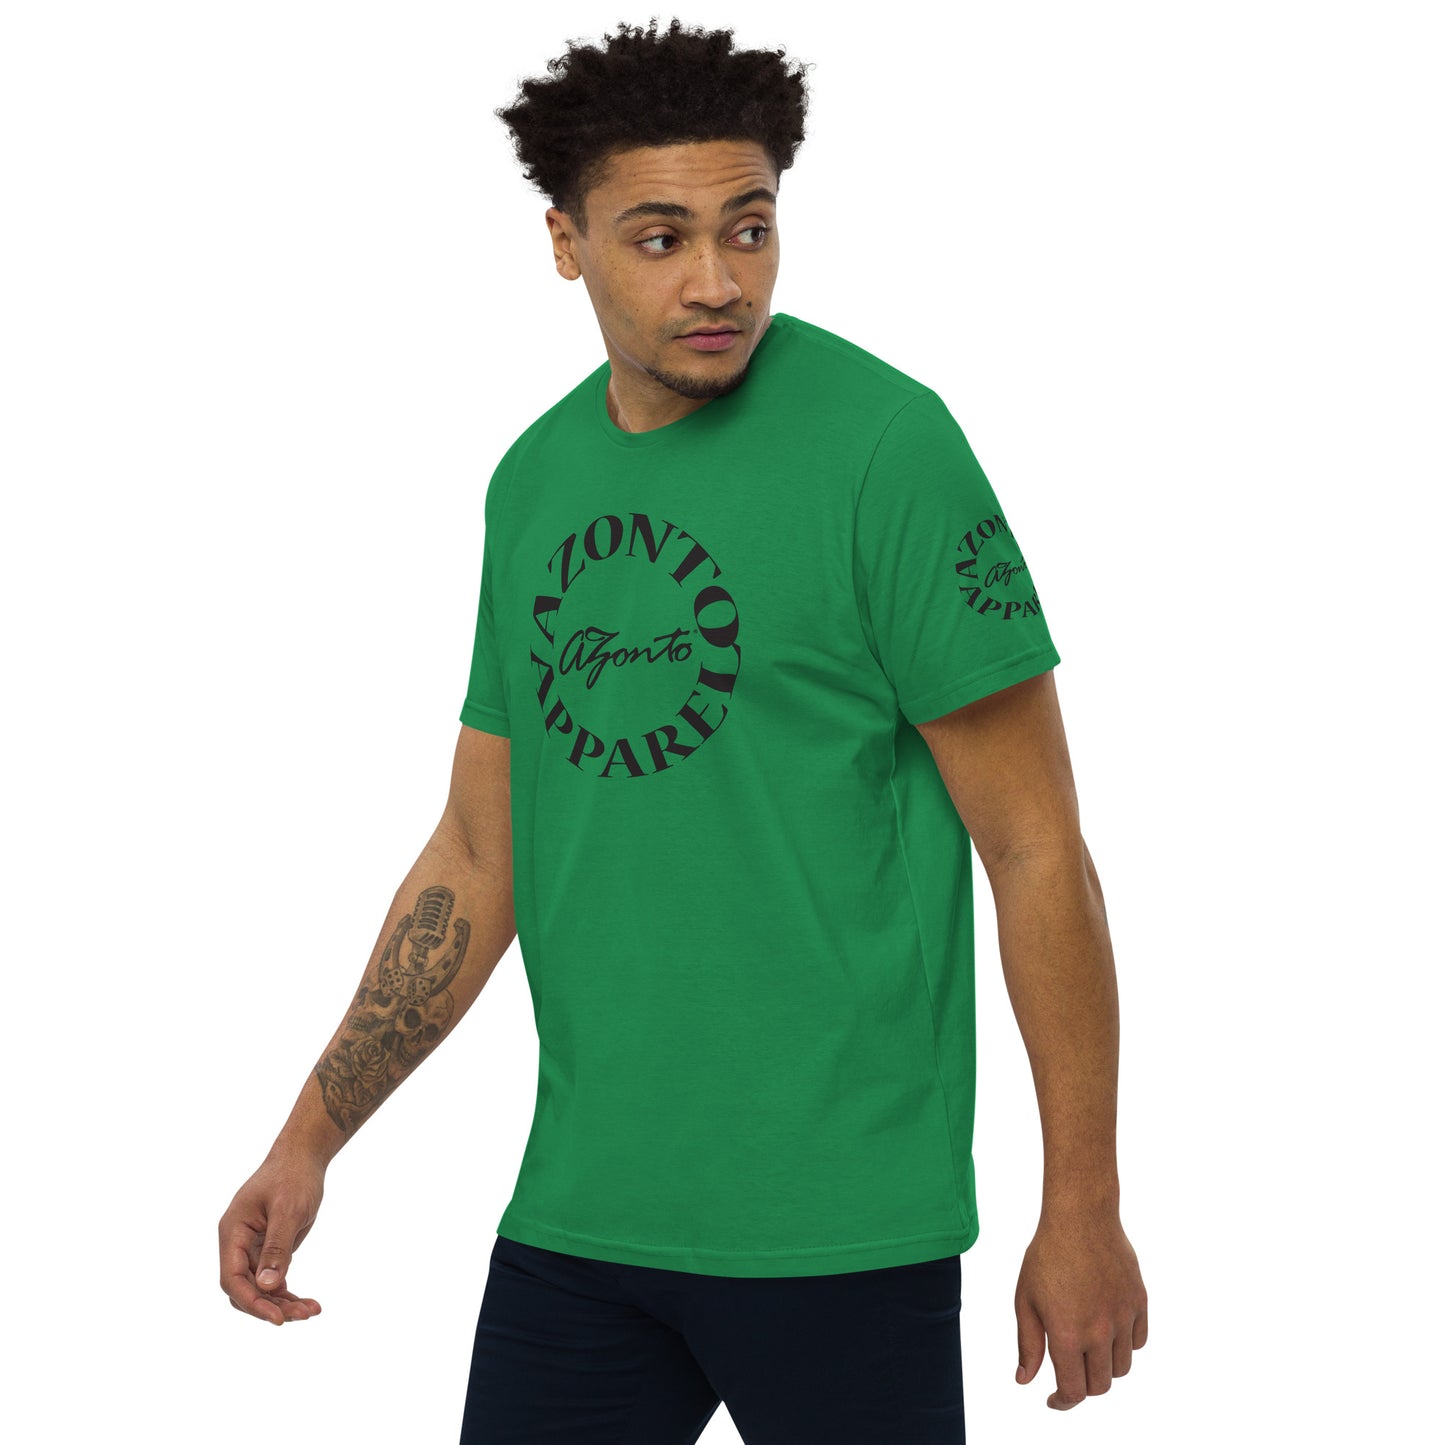 AZONTO Men's fitted straight cut t-shirt